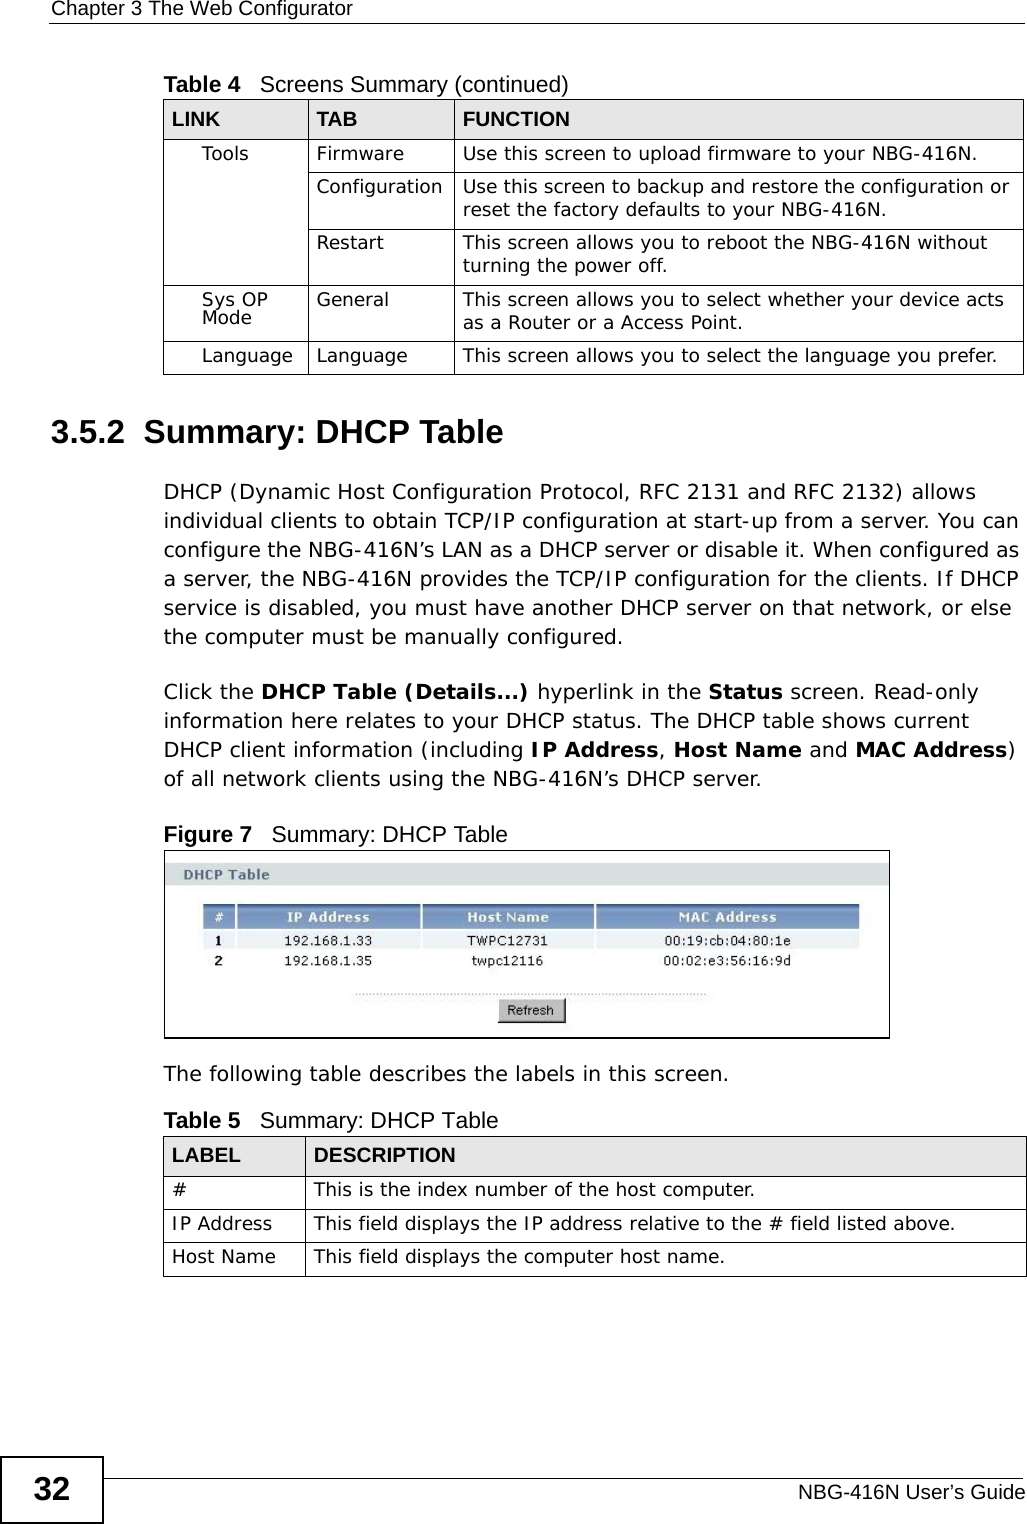 Chapter 3 The Web ConfiguratorNBG-416N User’s Guide323.5.2  Summary: DHCP Table    DHCP (Dynamic Host Configuration Protocol, RFC 2131 and RFC 2132) allows individual clients to obtain TCP/IP configuration at start-up from a server. You can configure the NBG-416N’s LAN as a DHCP server or disable it. When configured as a server, the NBG-416N provides the TCP/IP configuration for the clients. If DHCP service is disabled, you must have another DHCP server on that network, or else the computer must be manually configured.Click the DHCP Table (Details...) hyperlink in the Status screen. Read-only information here relates to your DHCP status. The DHCP table shows current DHCP client information (including IP Address, Host Name and MAC Address) of all network clients using the NBG-416N’s DHCP server.Figure 7   Summary: DHCP TableThe following table describes the labels in this screen.Tools Firmware Use this screen to upload firmware to your NBG-416N.Configuration Use this screen to backup and restore the configuration or reset the factory defaults to your NBG-416N. Restart This screen allows you to reboot the NBG-416N without turning the power off.Sys OP Mode General This screen allows you to select whether your device acts as a Router or a Access Point.Language Language This screen allows you to select the language you prefer.Table 4   Screens Summary (continued)LINK TAB FUNCTIONTable 5   Summary: DHCP TableLABEL  DESCRIPTION#  This is the index number of the host computer.IP Address This field displays the IP address relative to the # field listed above.Host Name  This field displays the computer host name.